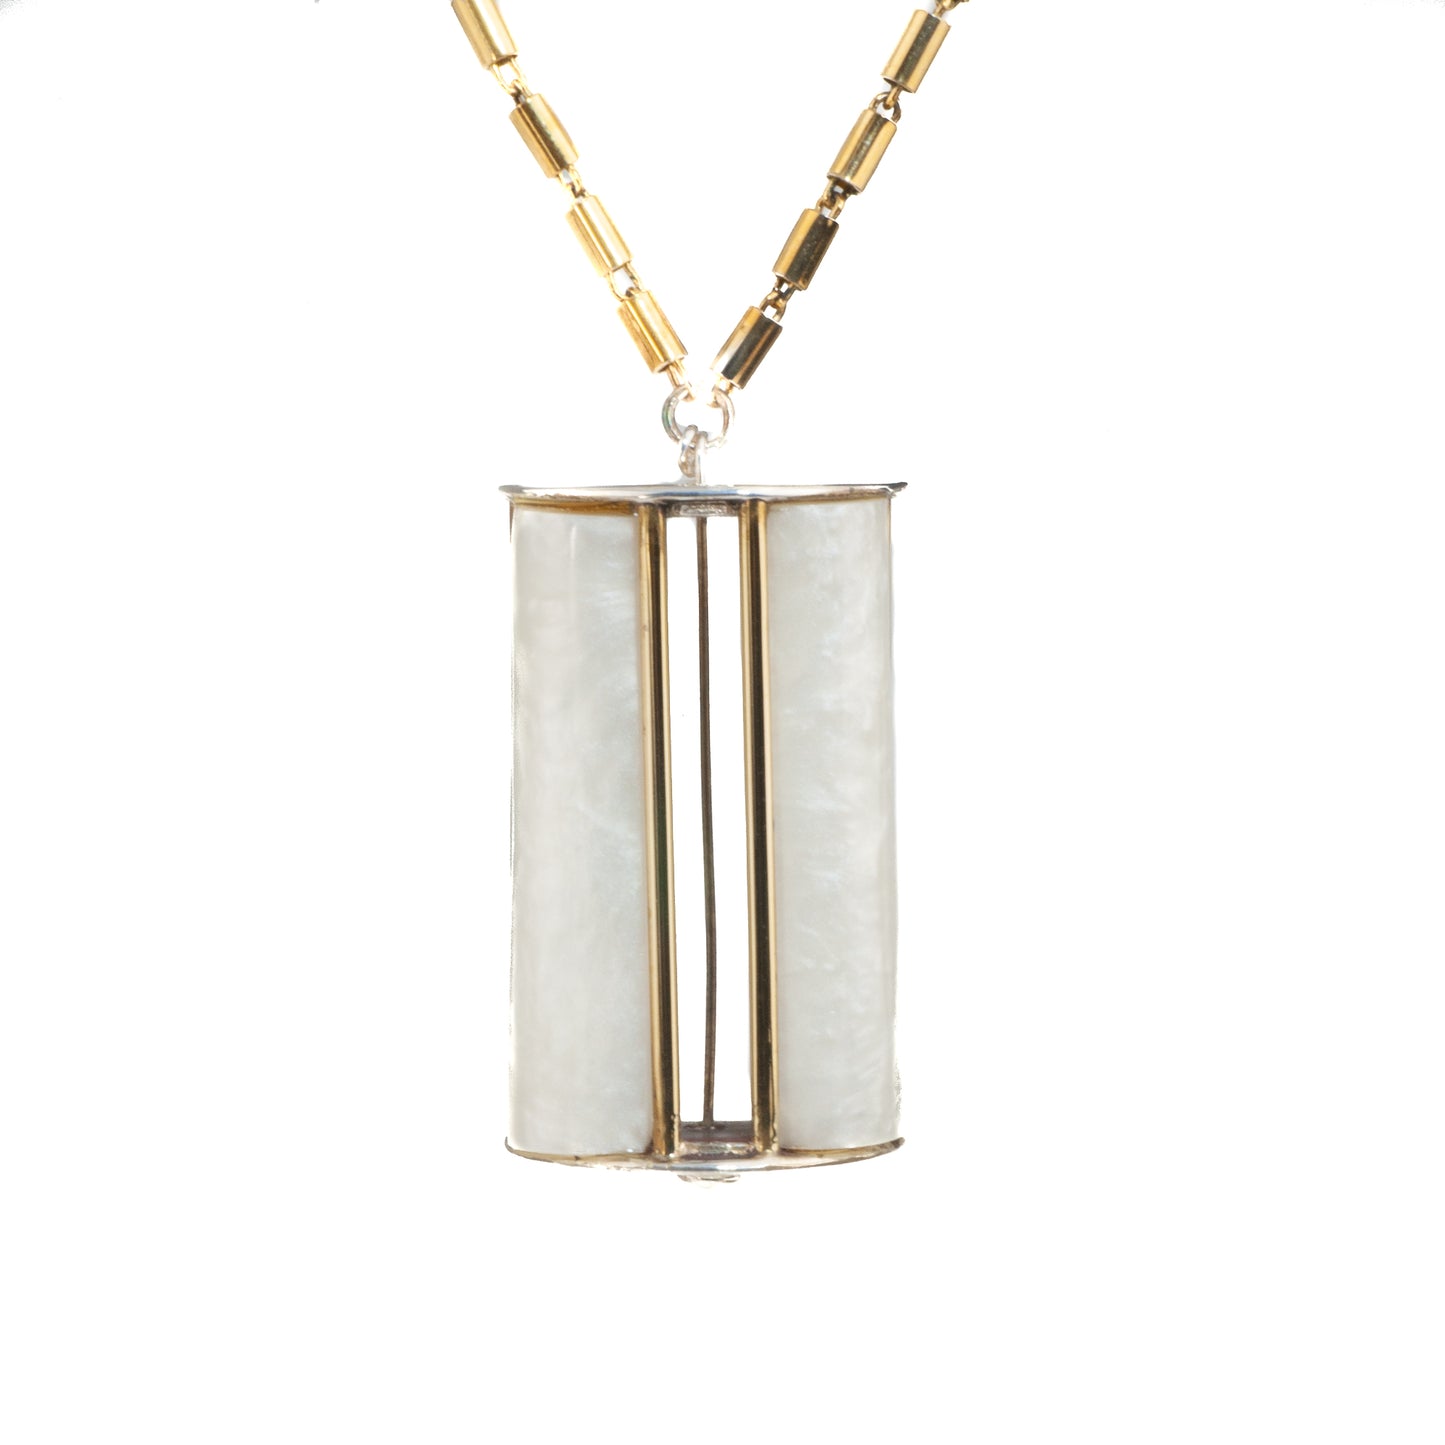 Tim Nelson Designs "Geo Frosted" Necklace